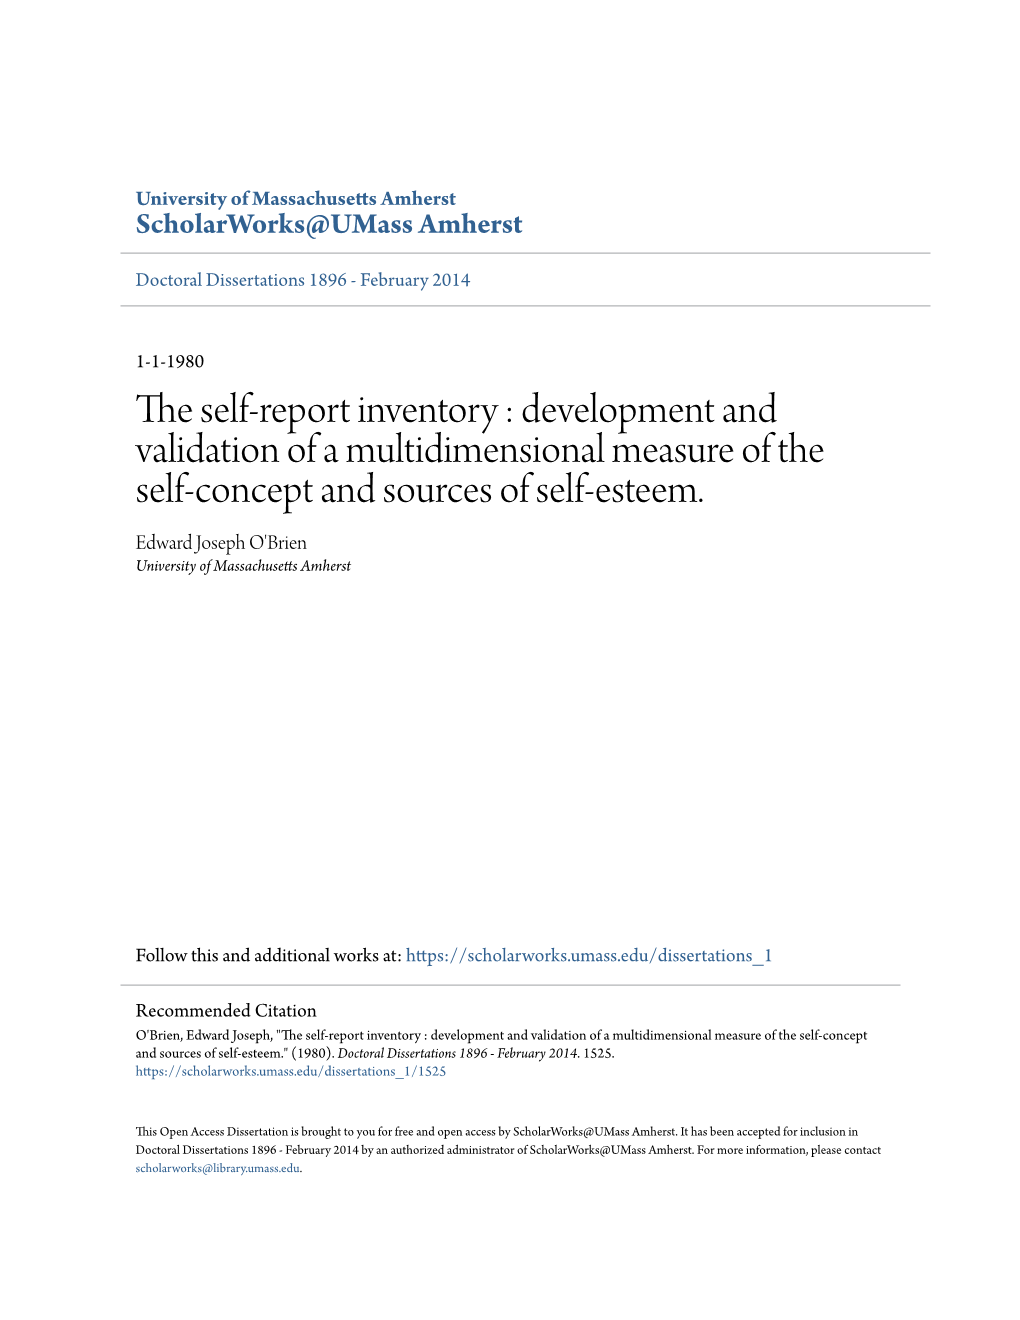 The Self-Report Inventory : Development and Validation of a Multidimensional Measure of the Self-Concept and Sources of Self-Esteem